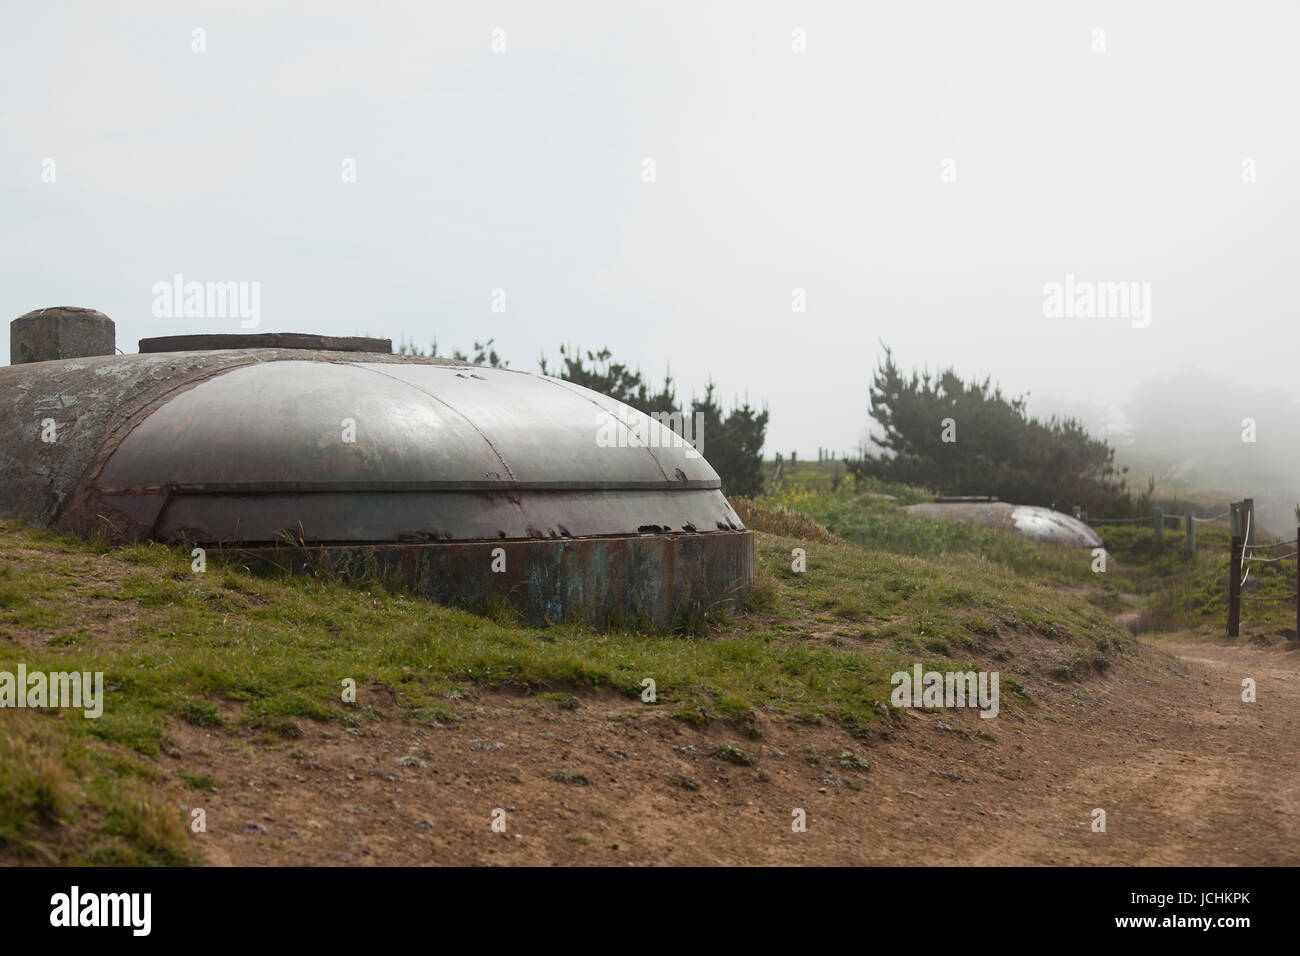 Abandoned military bunkers (military pillbox) at Golden Gate National Recreation Area - San Francisco, California USA Stock Photo